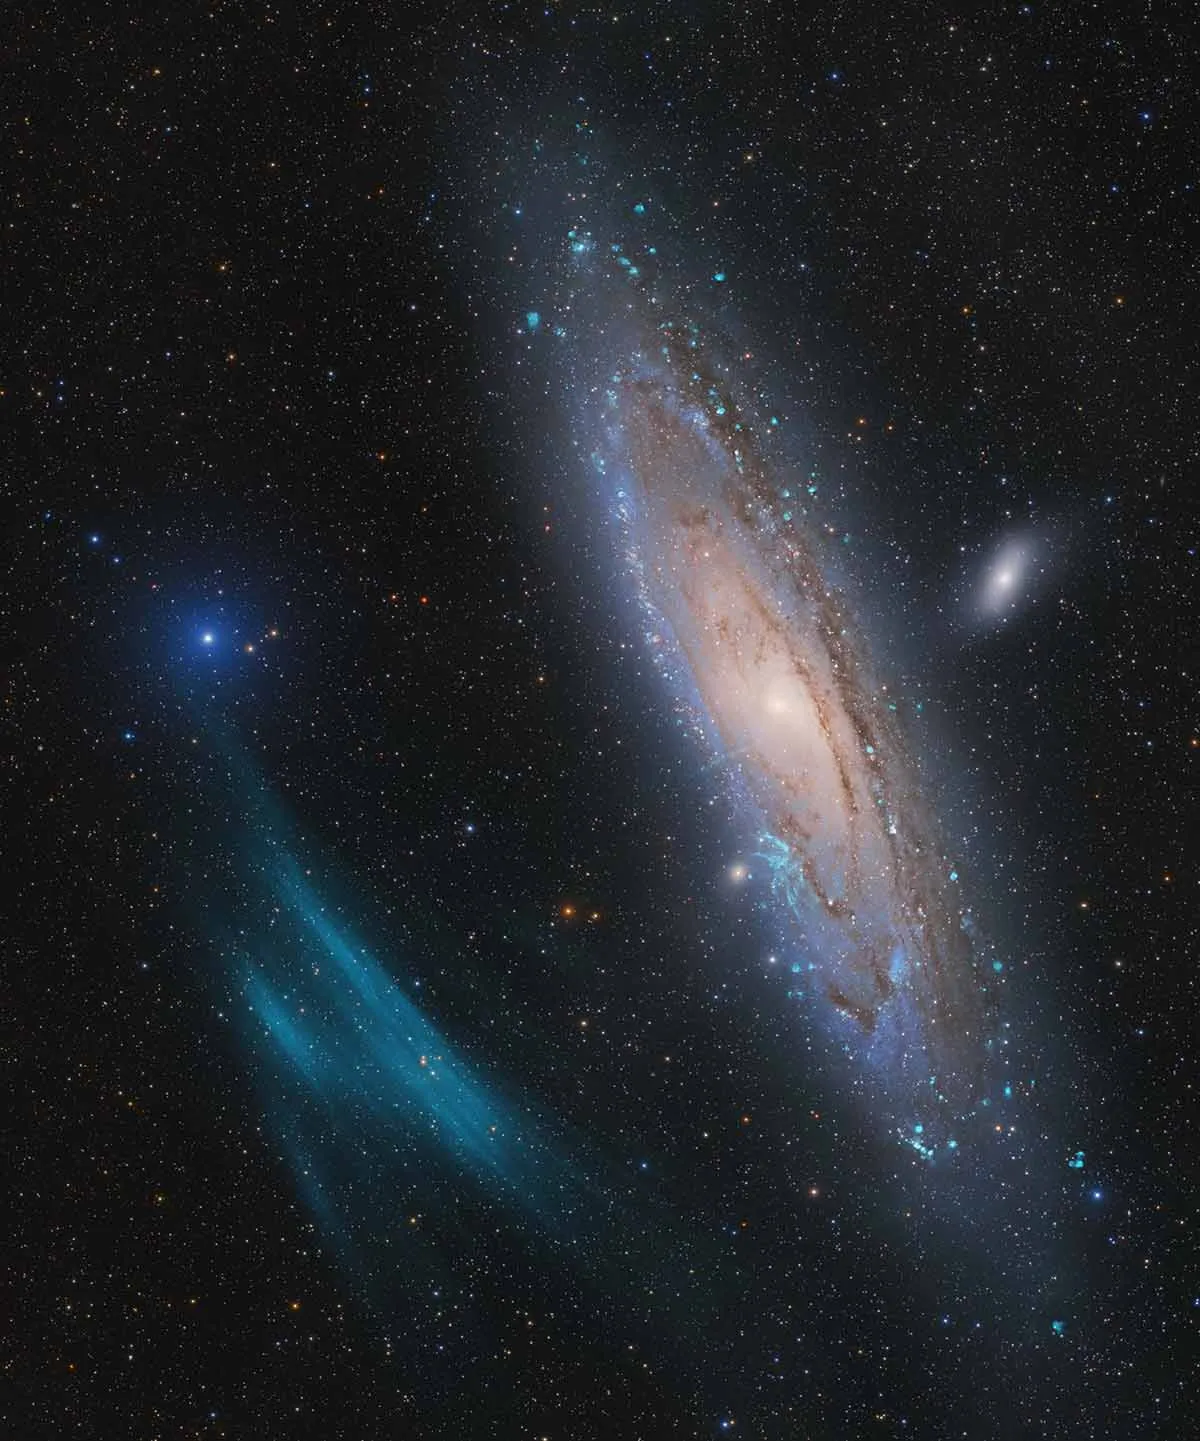 Andromeda, Unexpected © Marcel Drechsler, Xavier Strottner, Yann Sainty, Location: Near Nancy, France. Winner, Galaxies category and overall winner. Equipment: Takahashi FSQ-106EDX4 telescope, Sky-Watcher EQ6 Pro mount, ZWO ASI2600MM Pro camera, 382 mm f/3.6, multiple exposures between 1 and 600 seconds, 111 hours total exposure